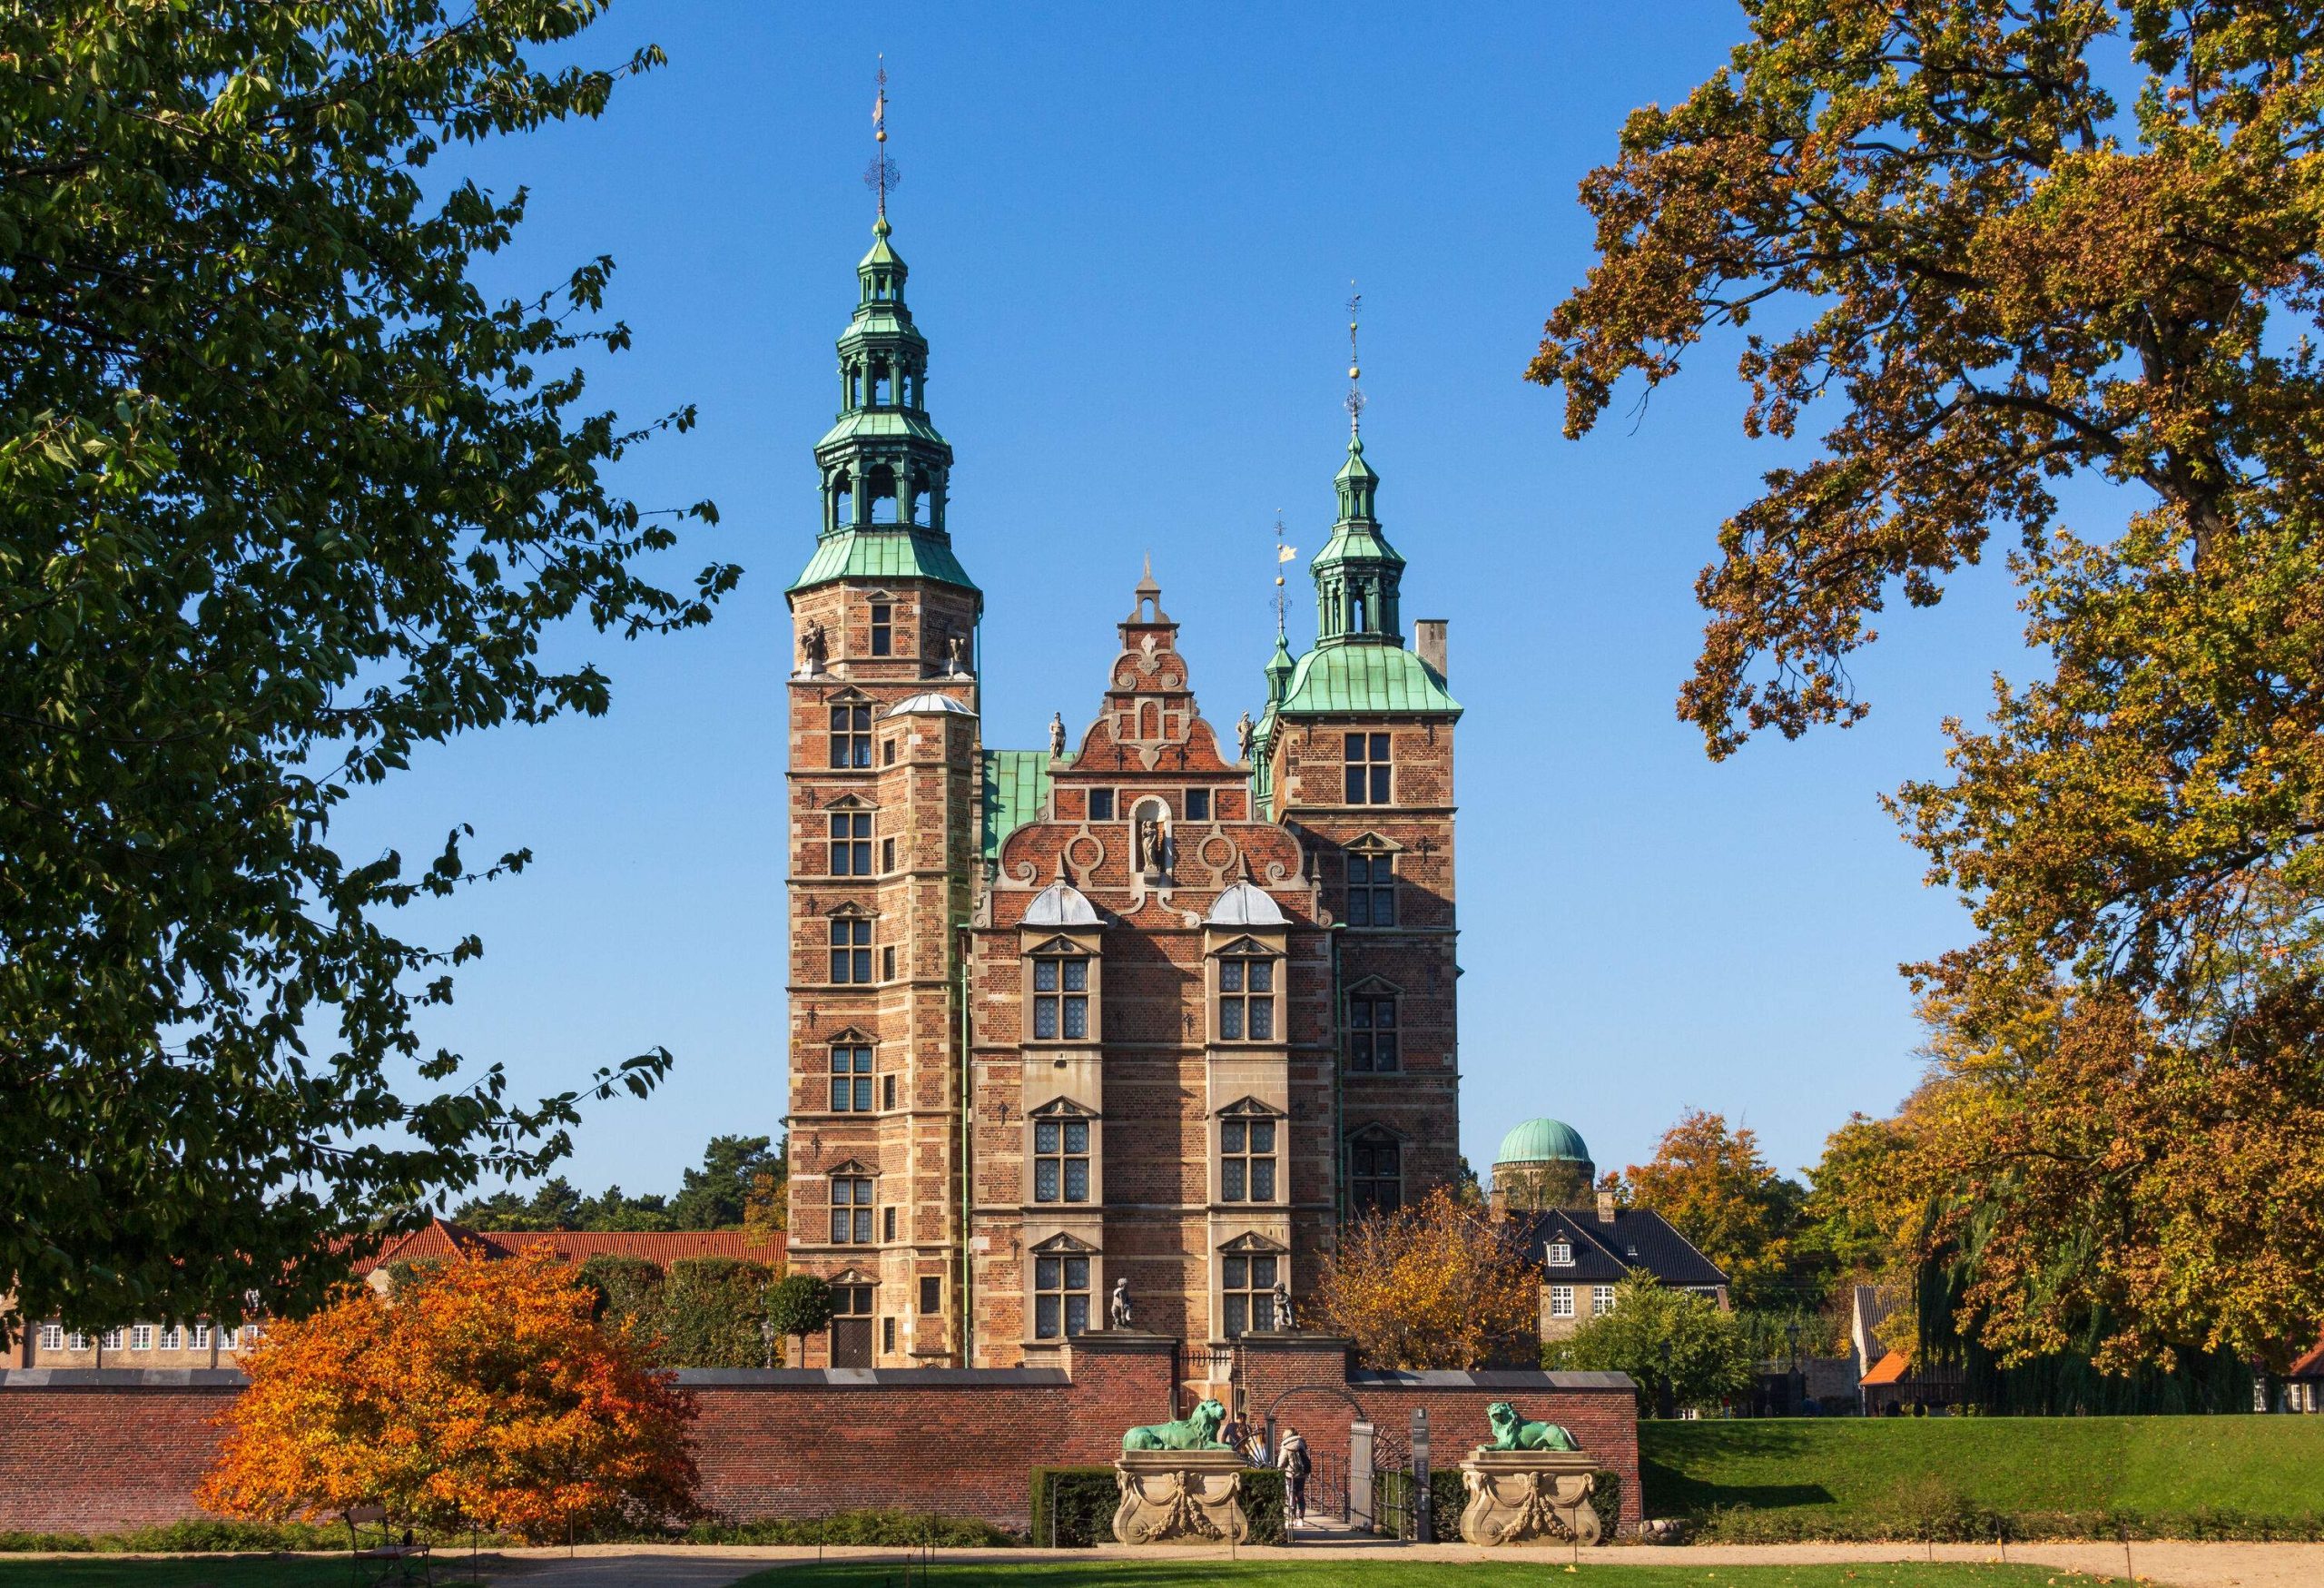 Rosenborg Castle is a brown Renaissance-style castle surrounded by a concrete gate and two towering spires of varying heights.